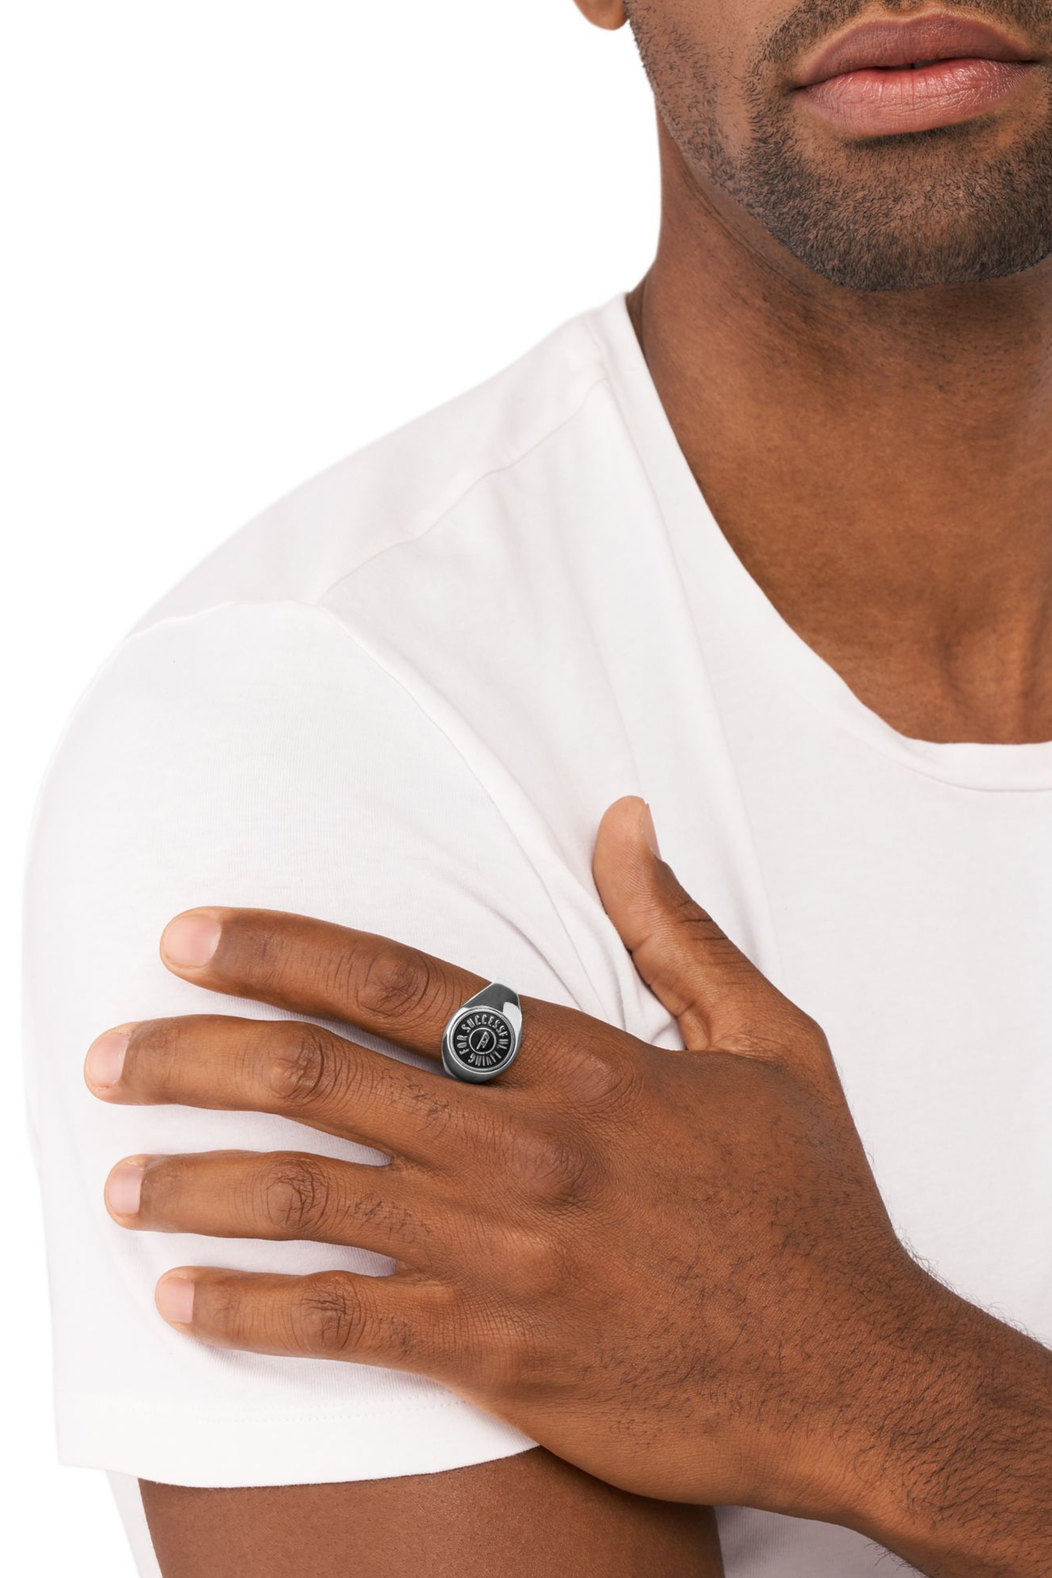 Stainless steel signet ring